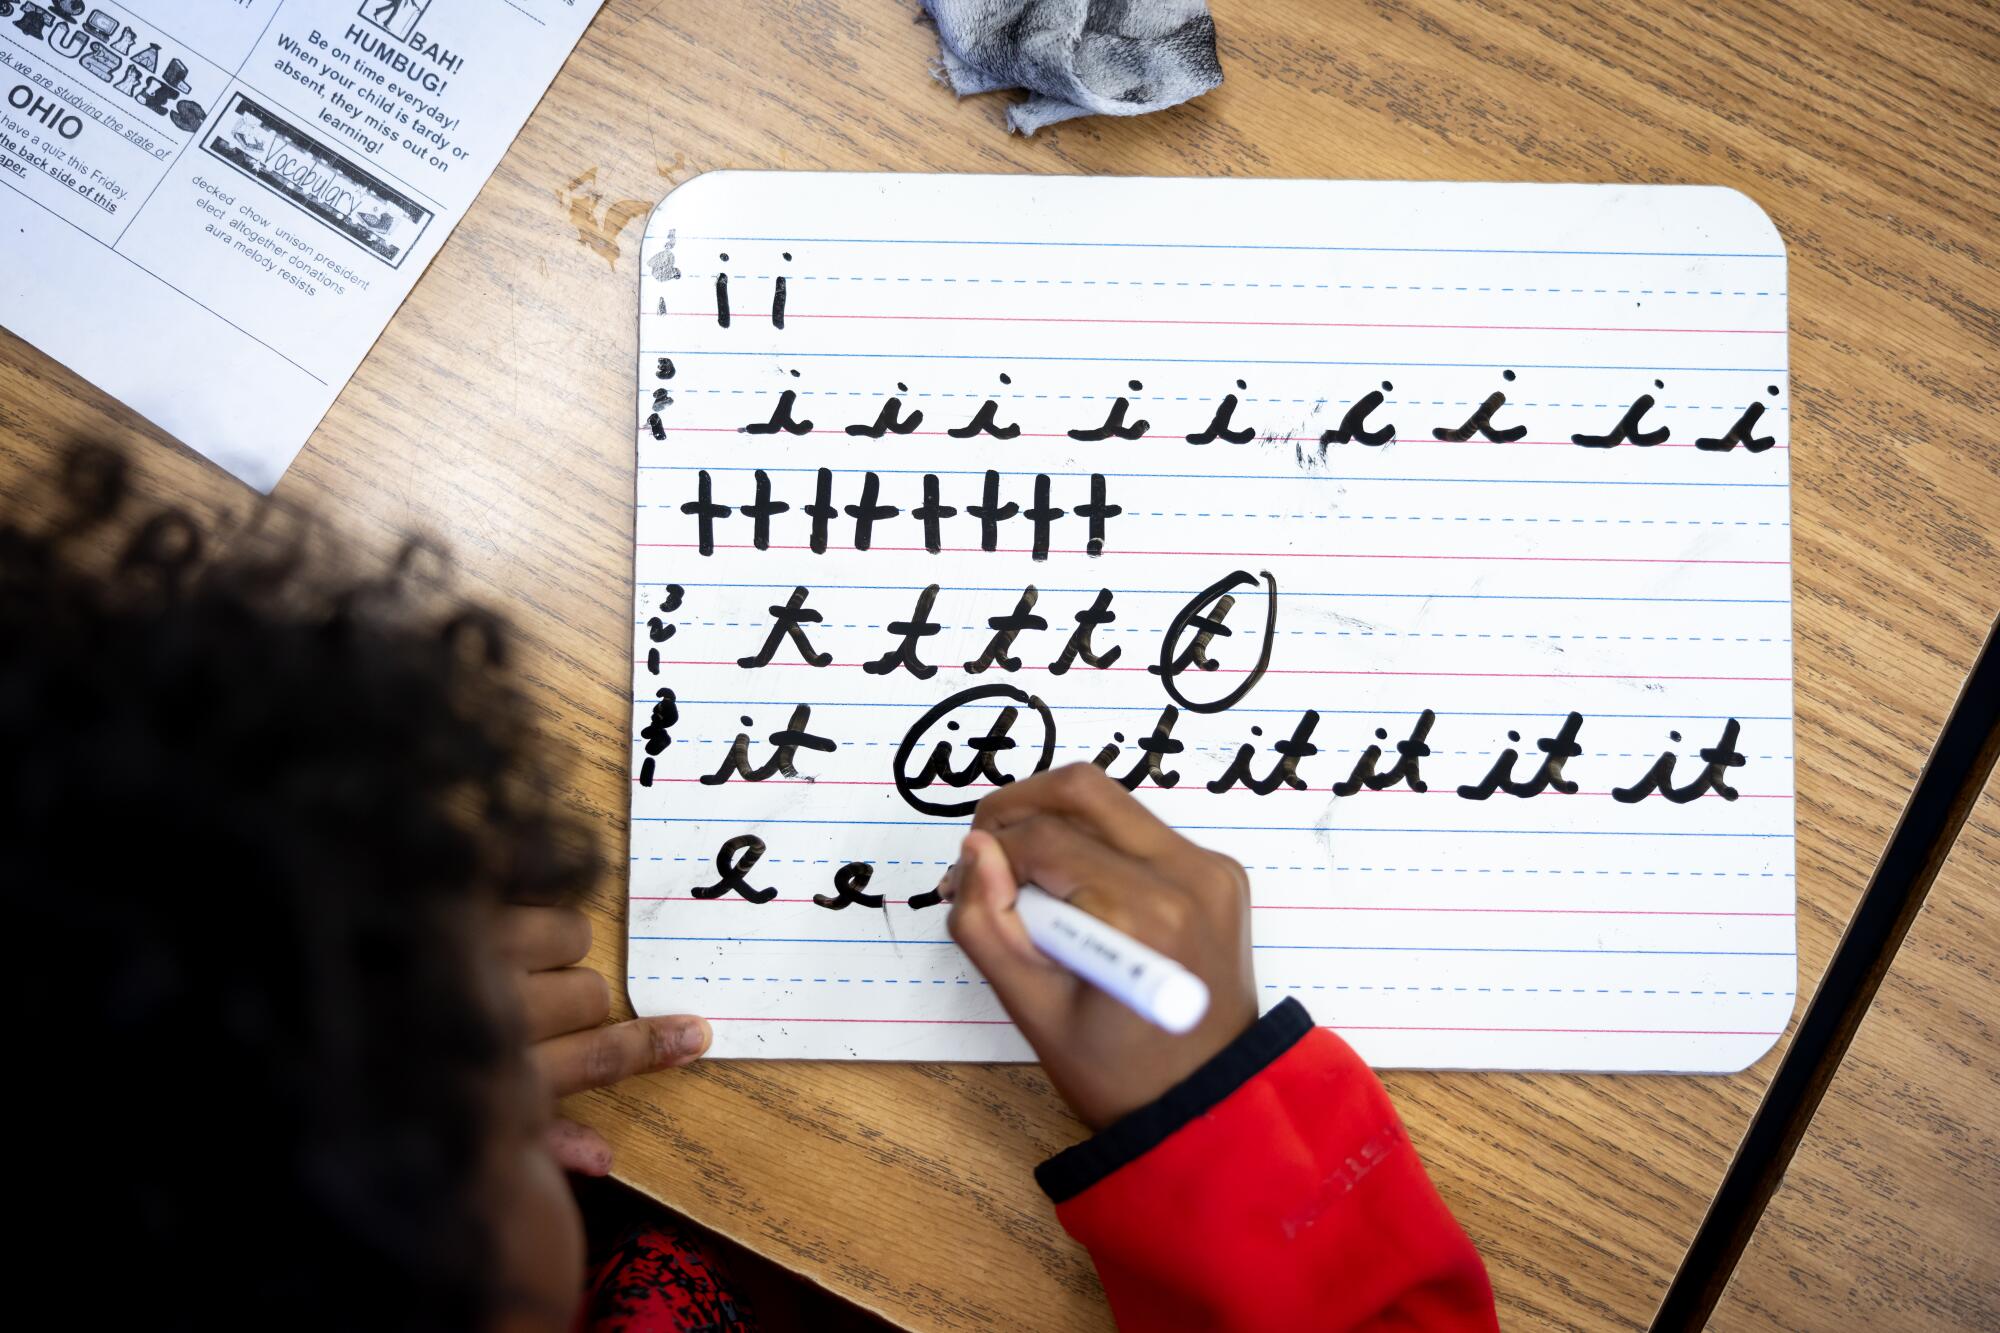 A fourth-grade student practices writing in cursive on lined paper. 